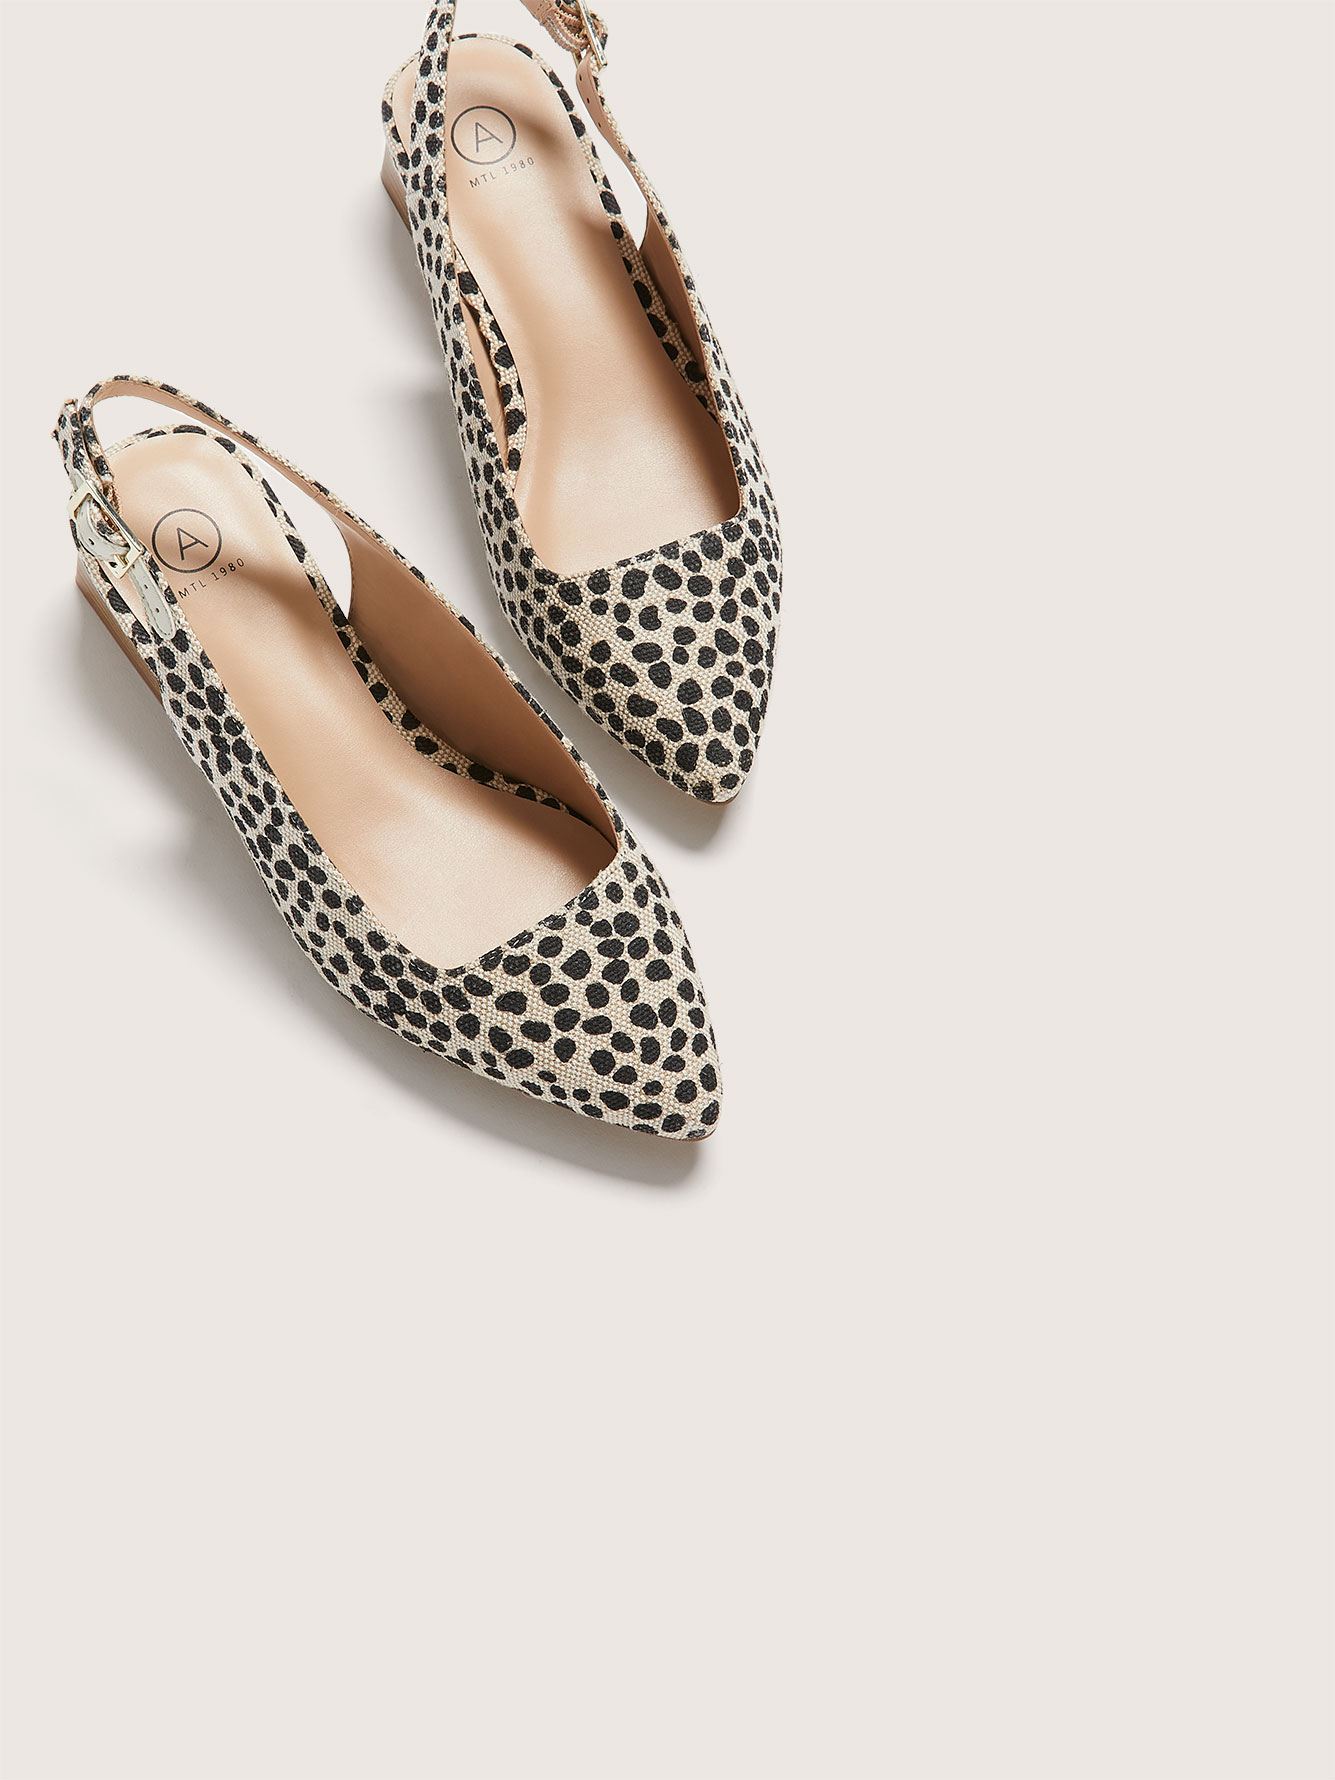 wide animal print shoes